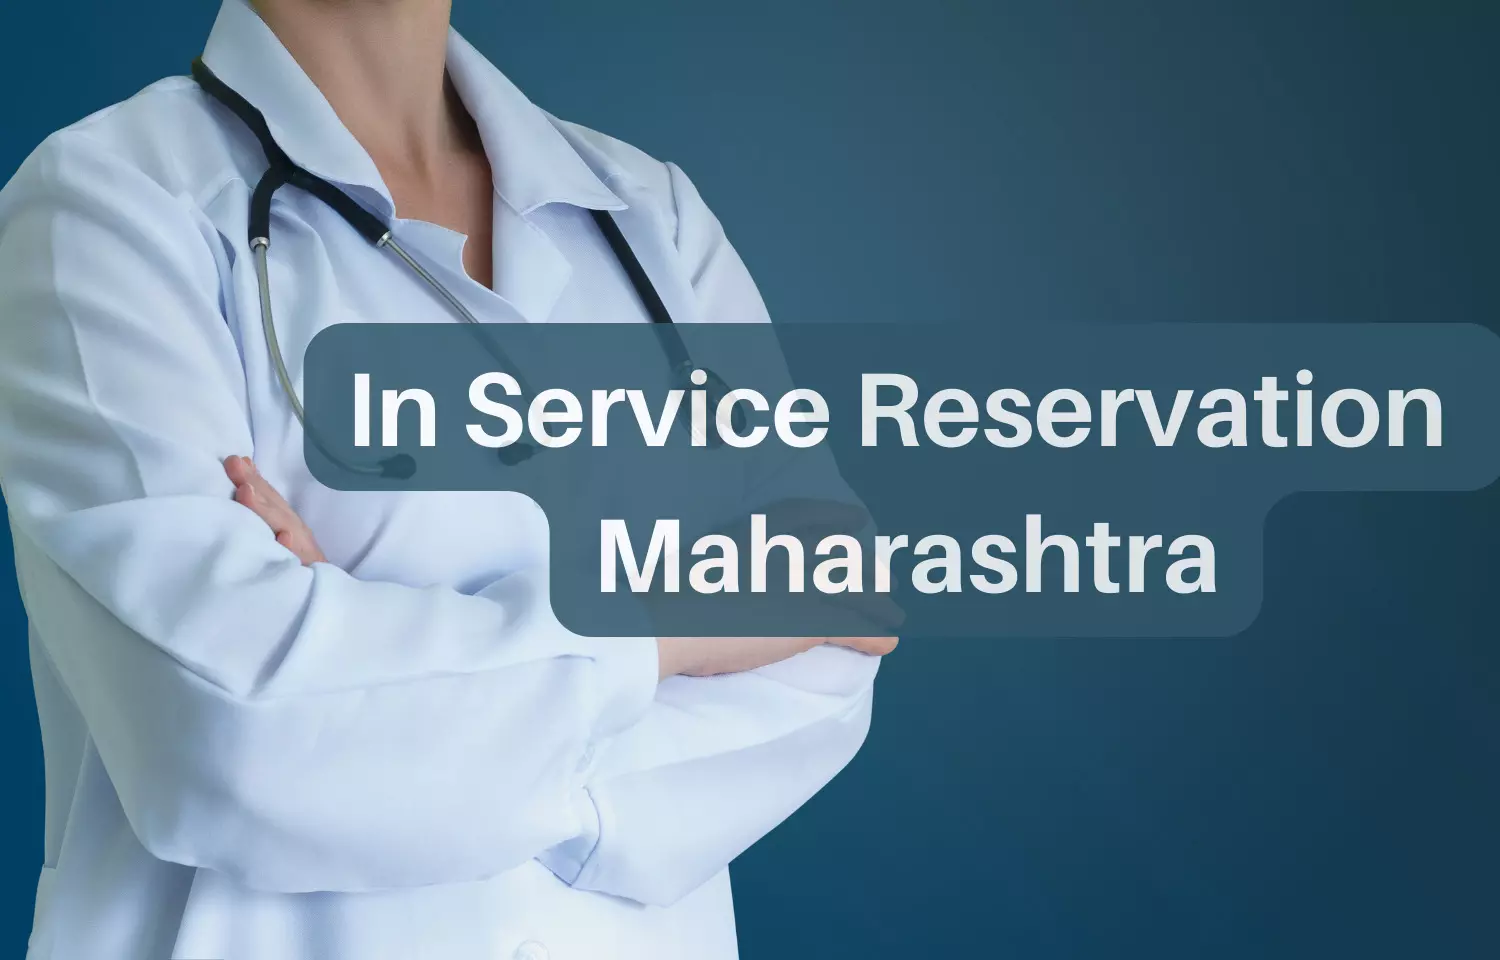 25 percent reservation for doctors after 3 years rural service in Maharashtra